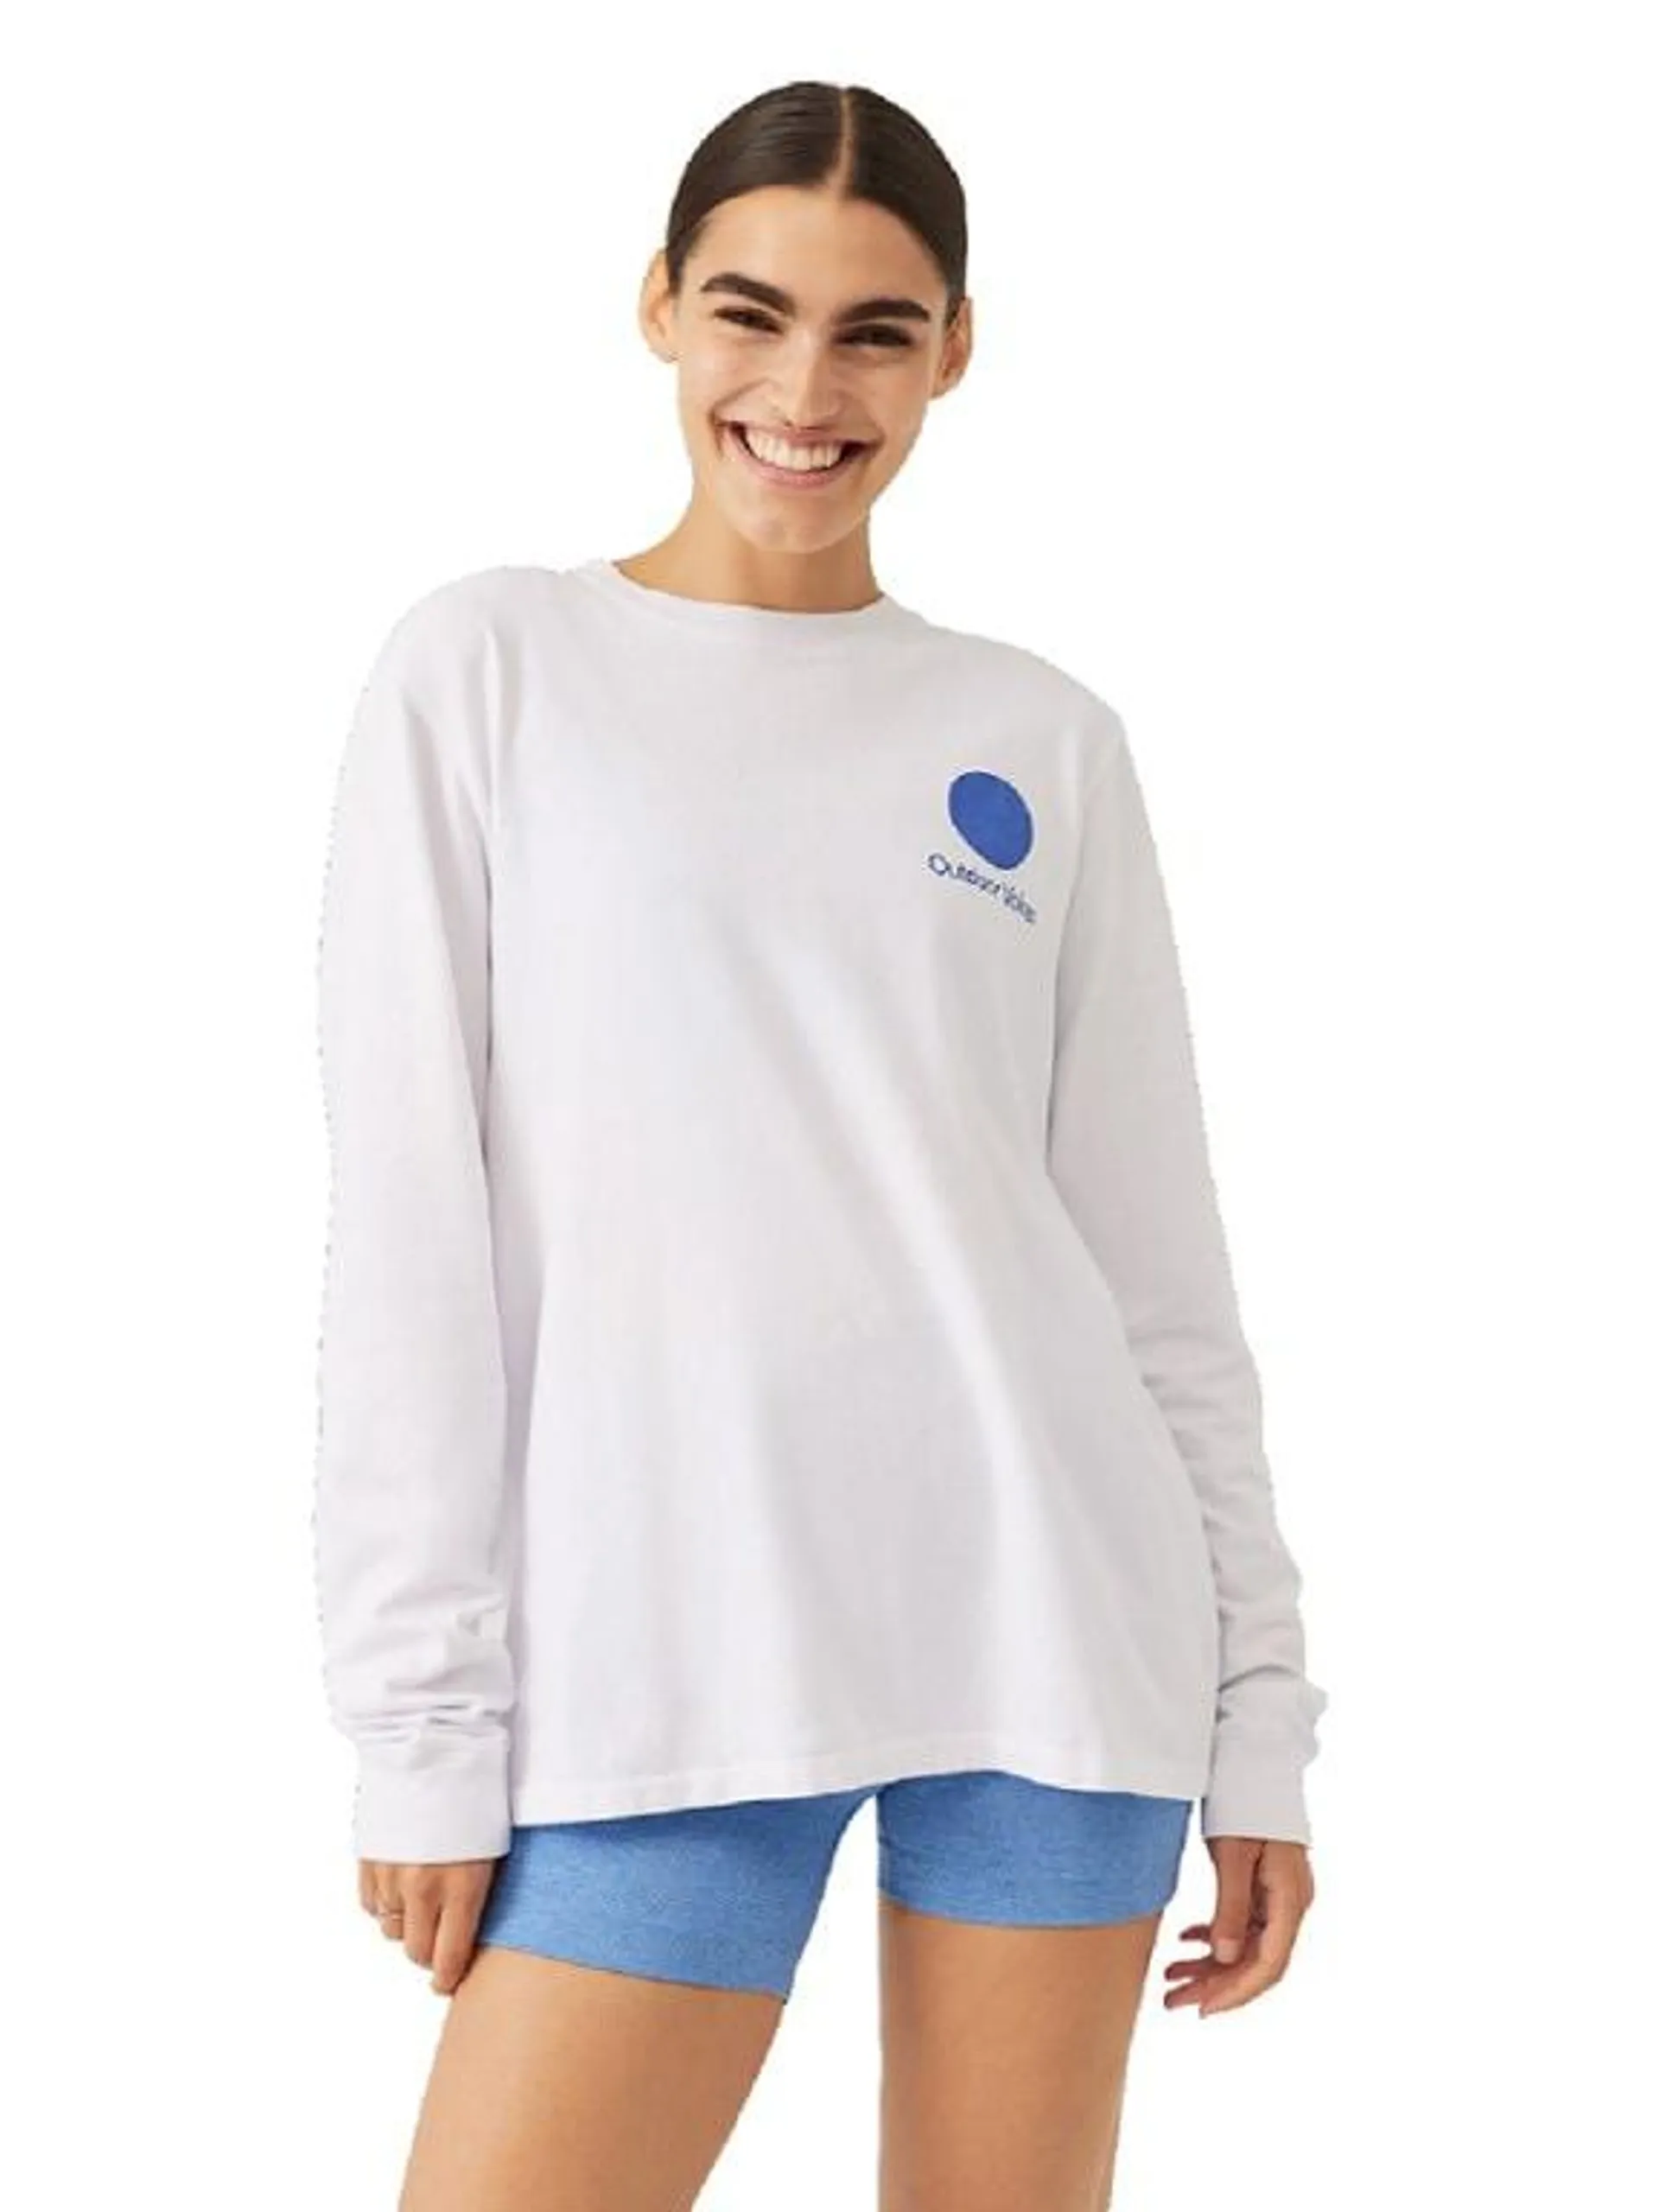 Outdoor Voices Long-Sleeve Shirt